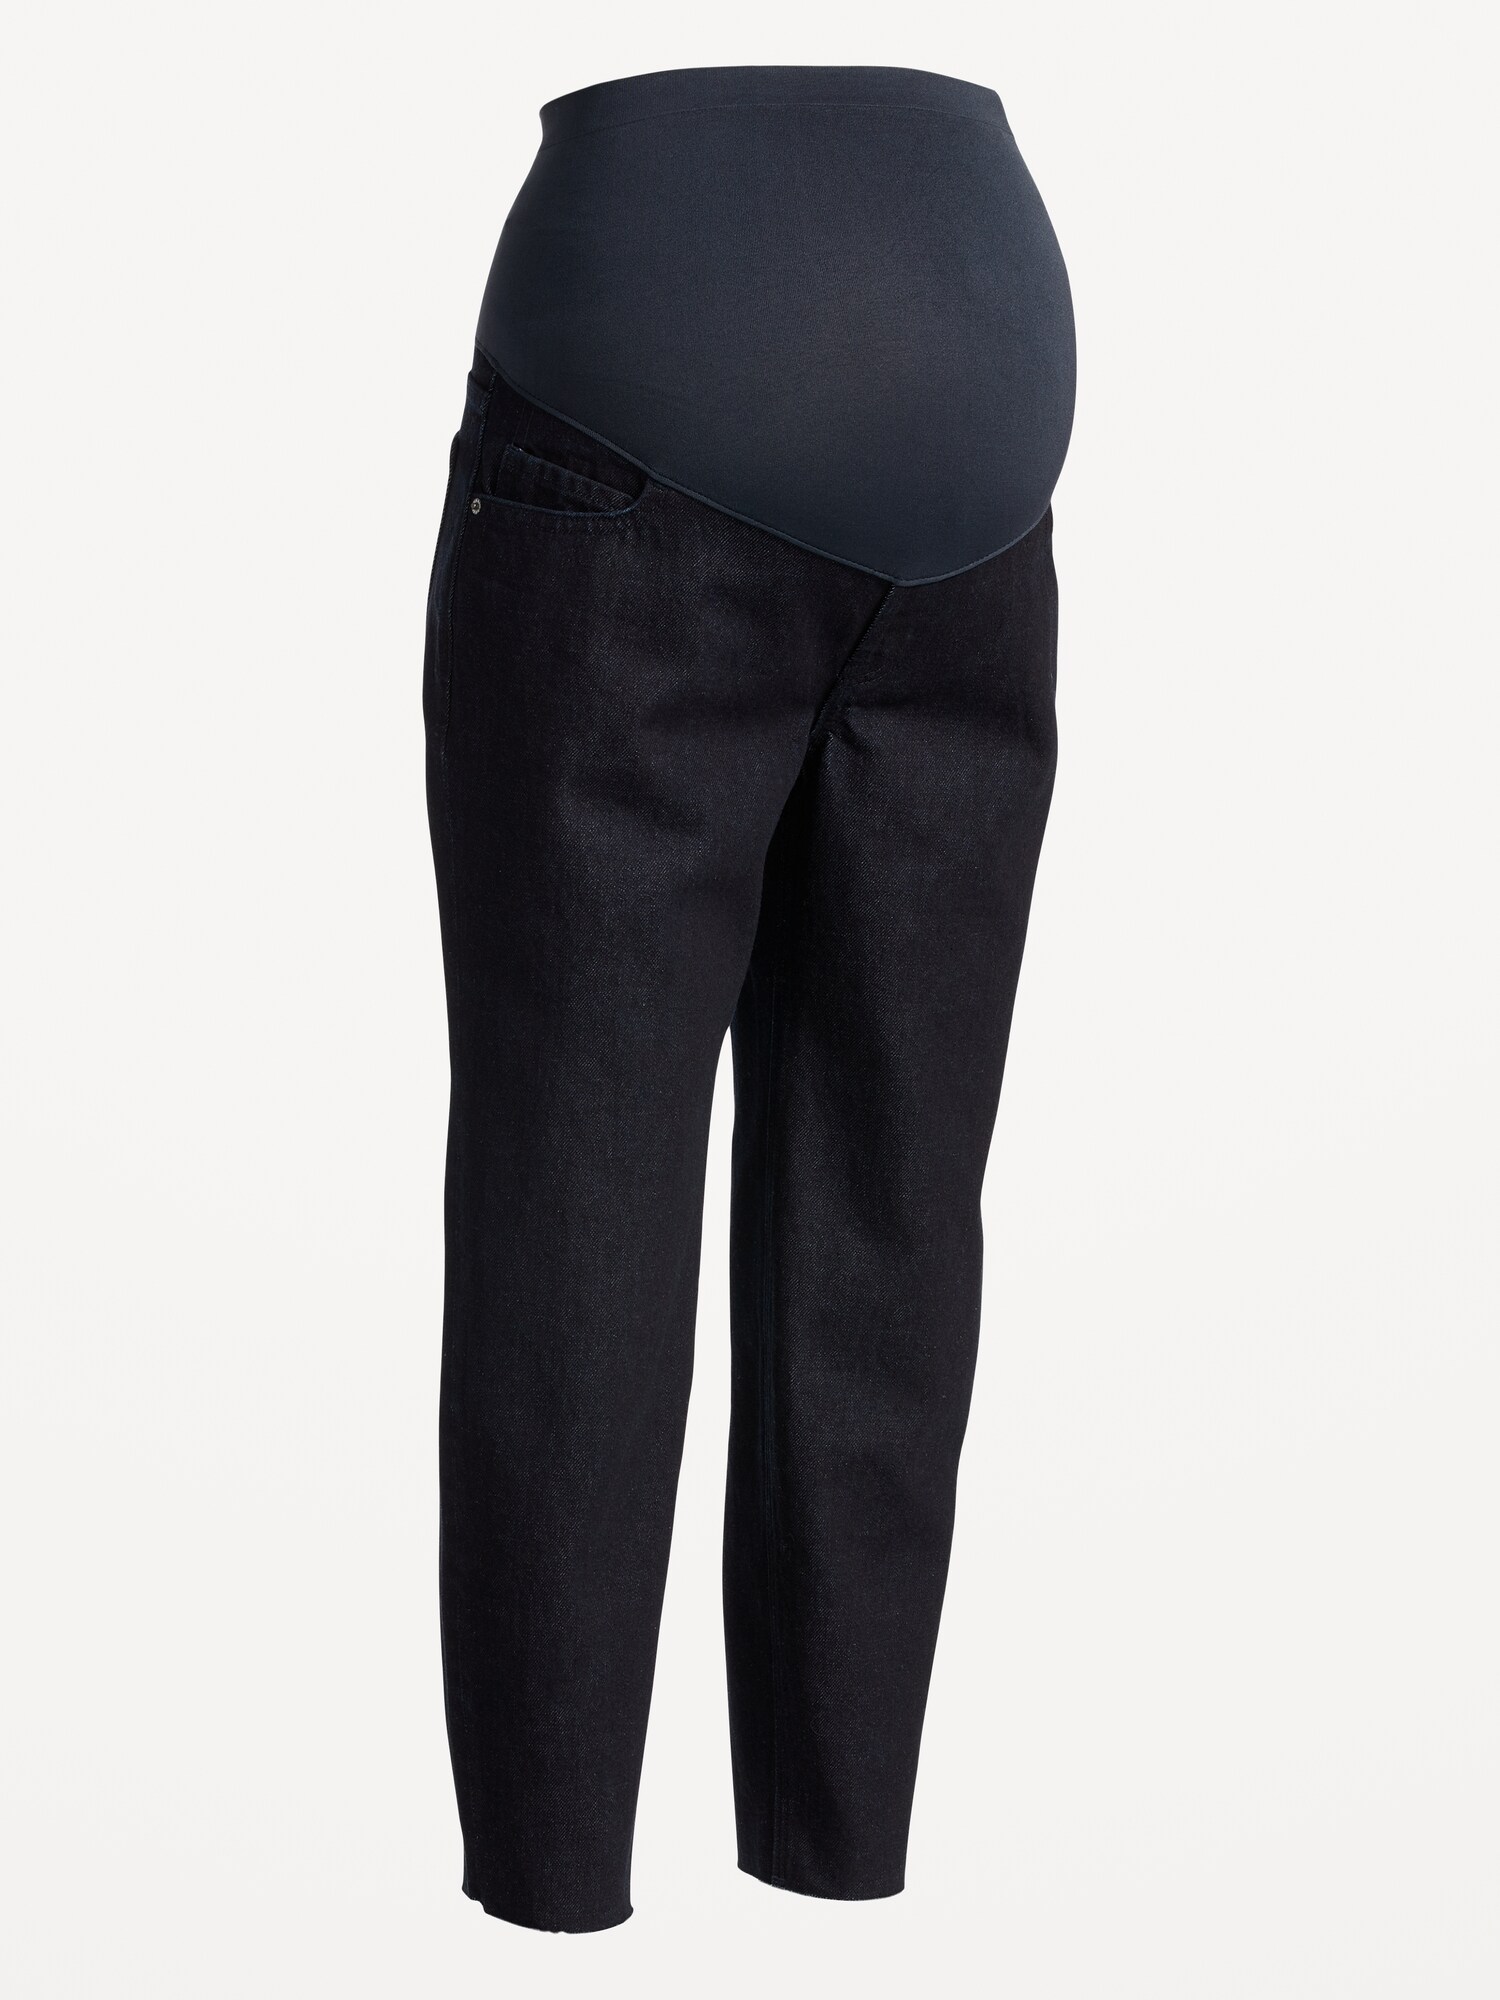 Tapered Grey Maternity Trousers